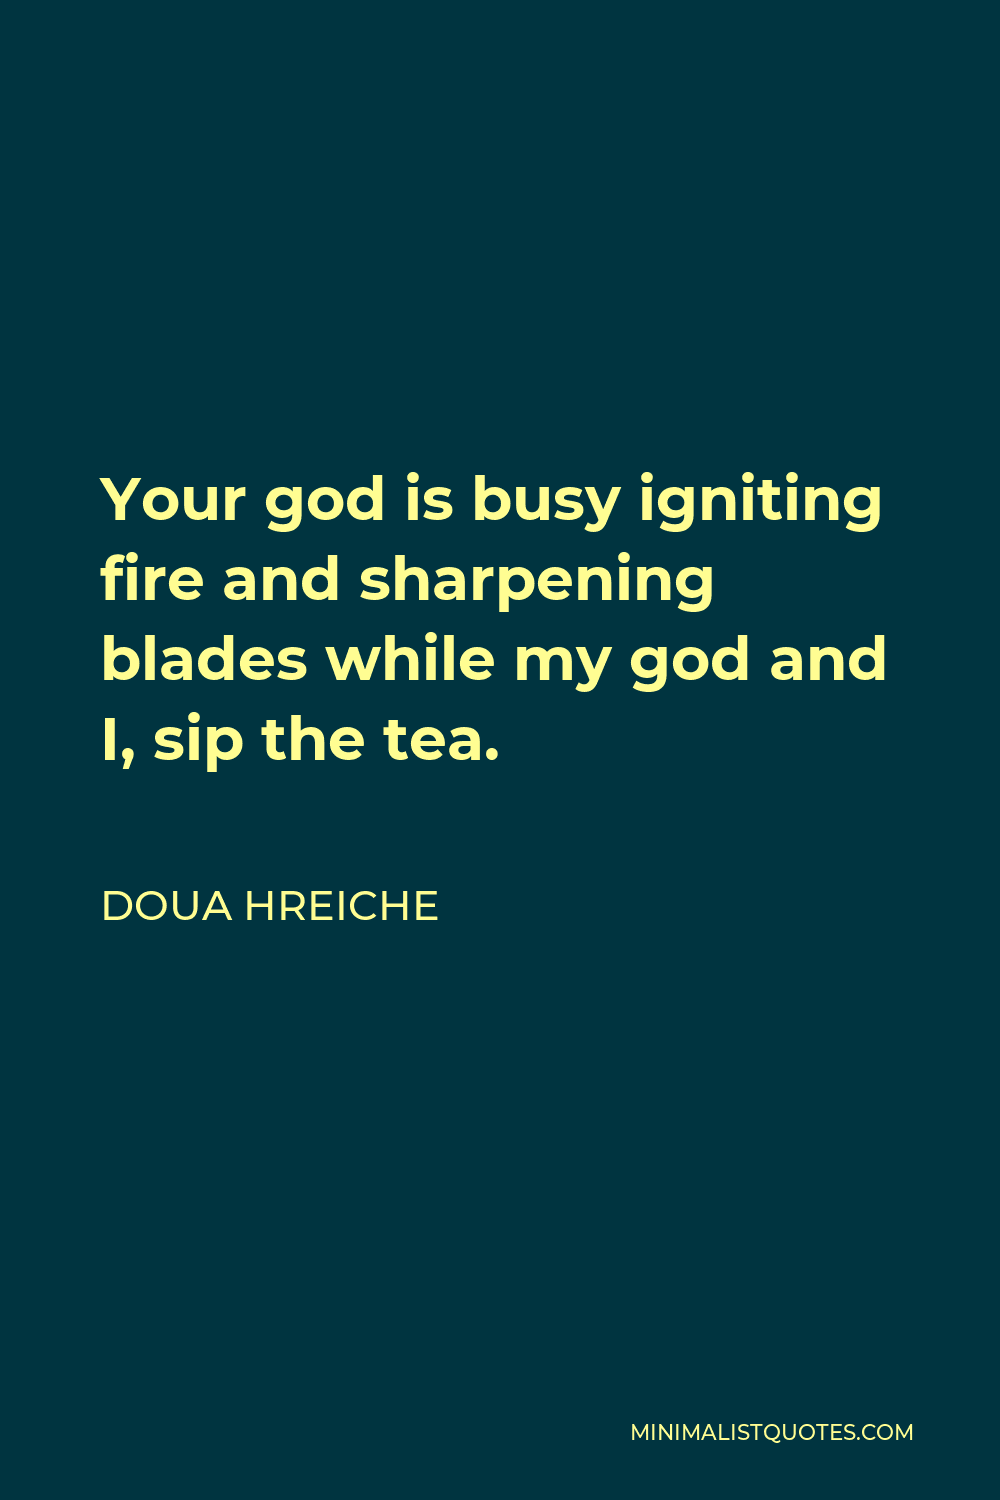 Doua Hreiche Quote - Your god is busy igniting fire and sharpening blades while my god and I, sip the tea.